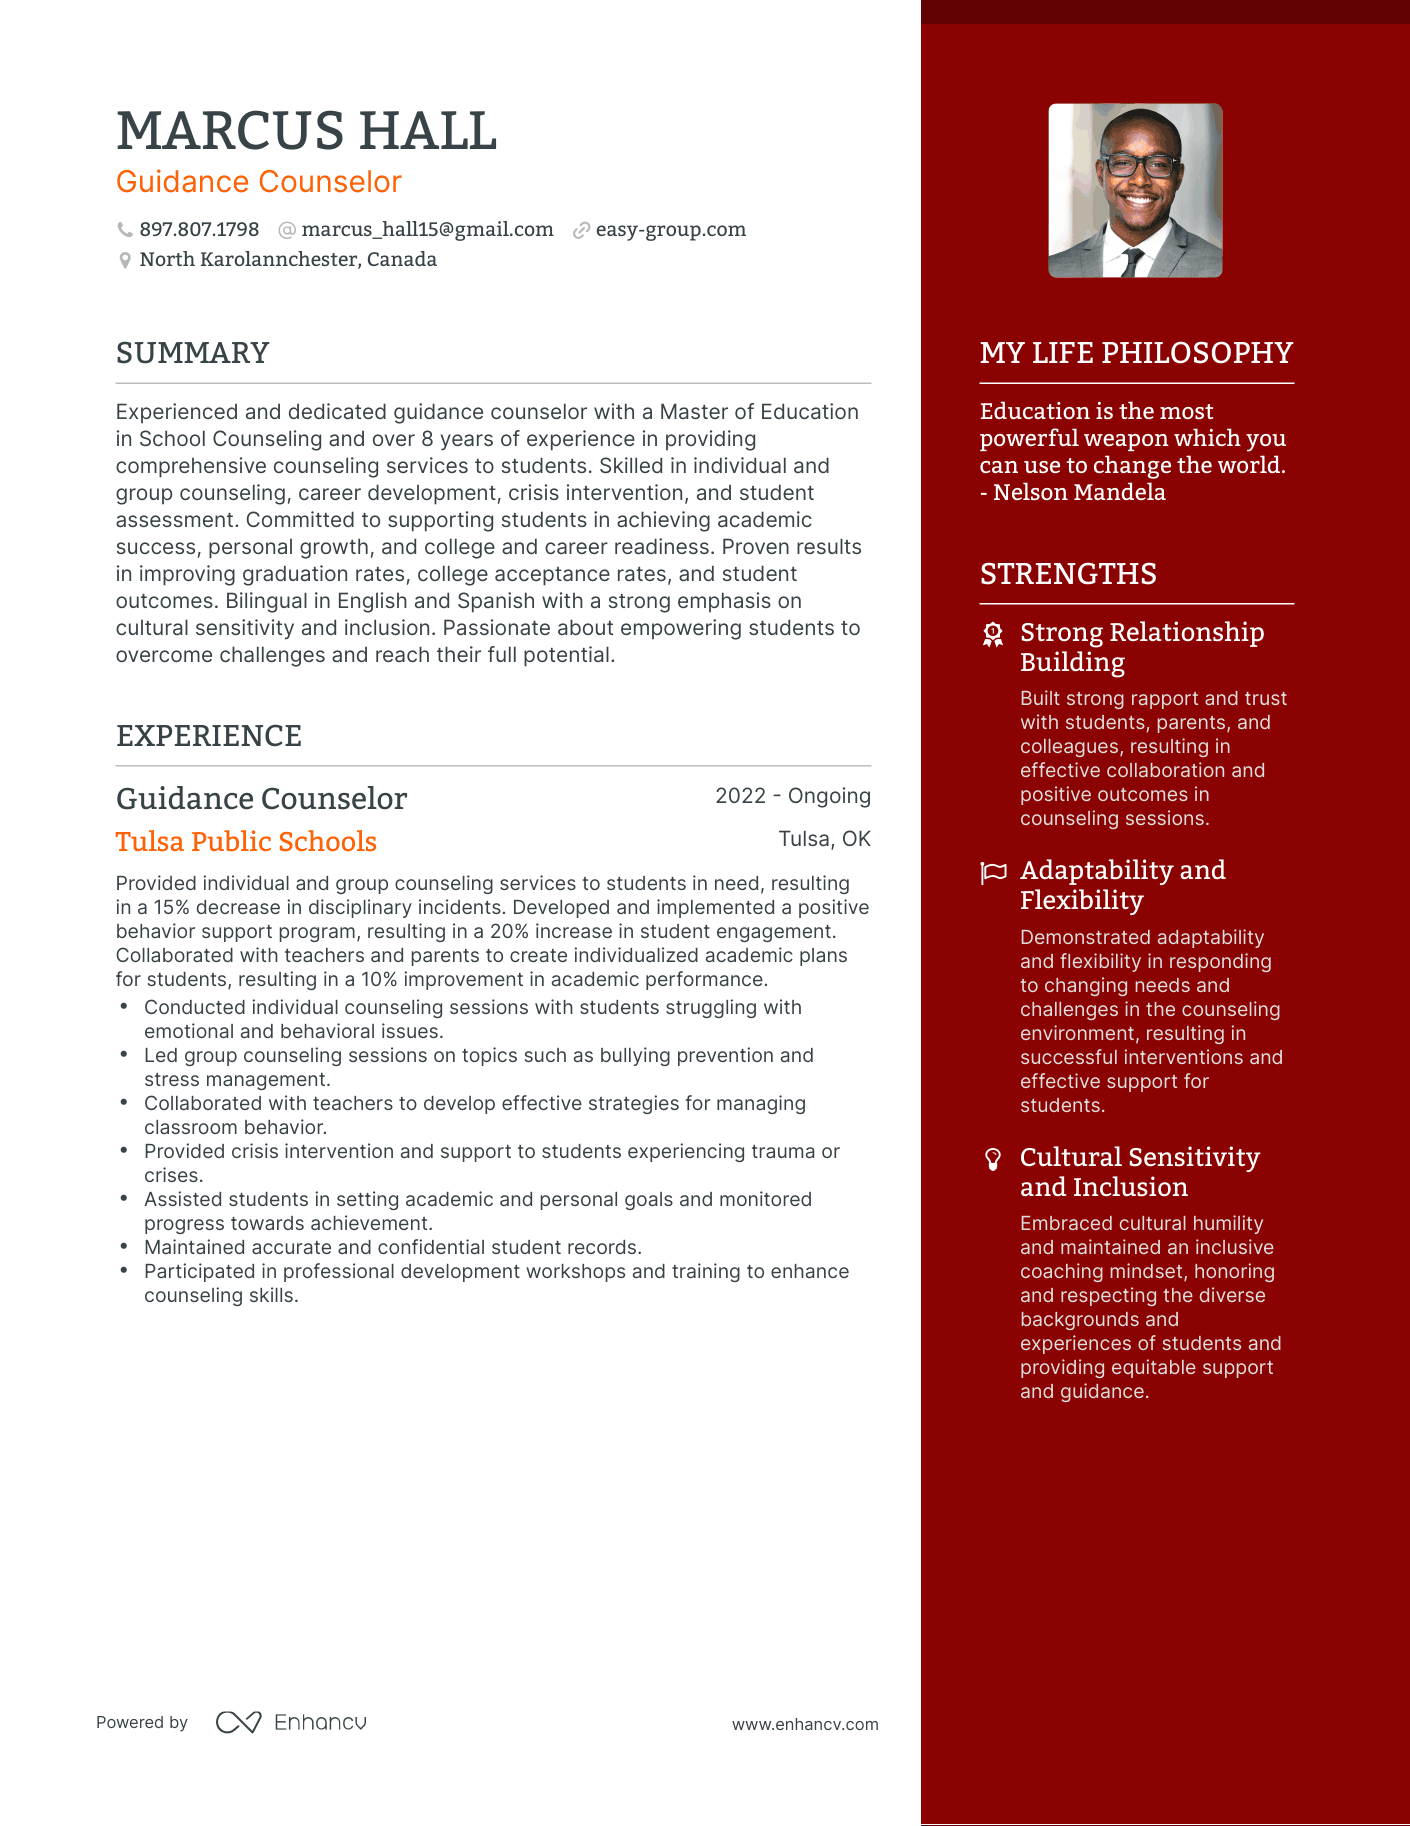 Guidance Counselor resume example